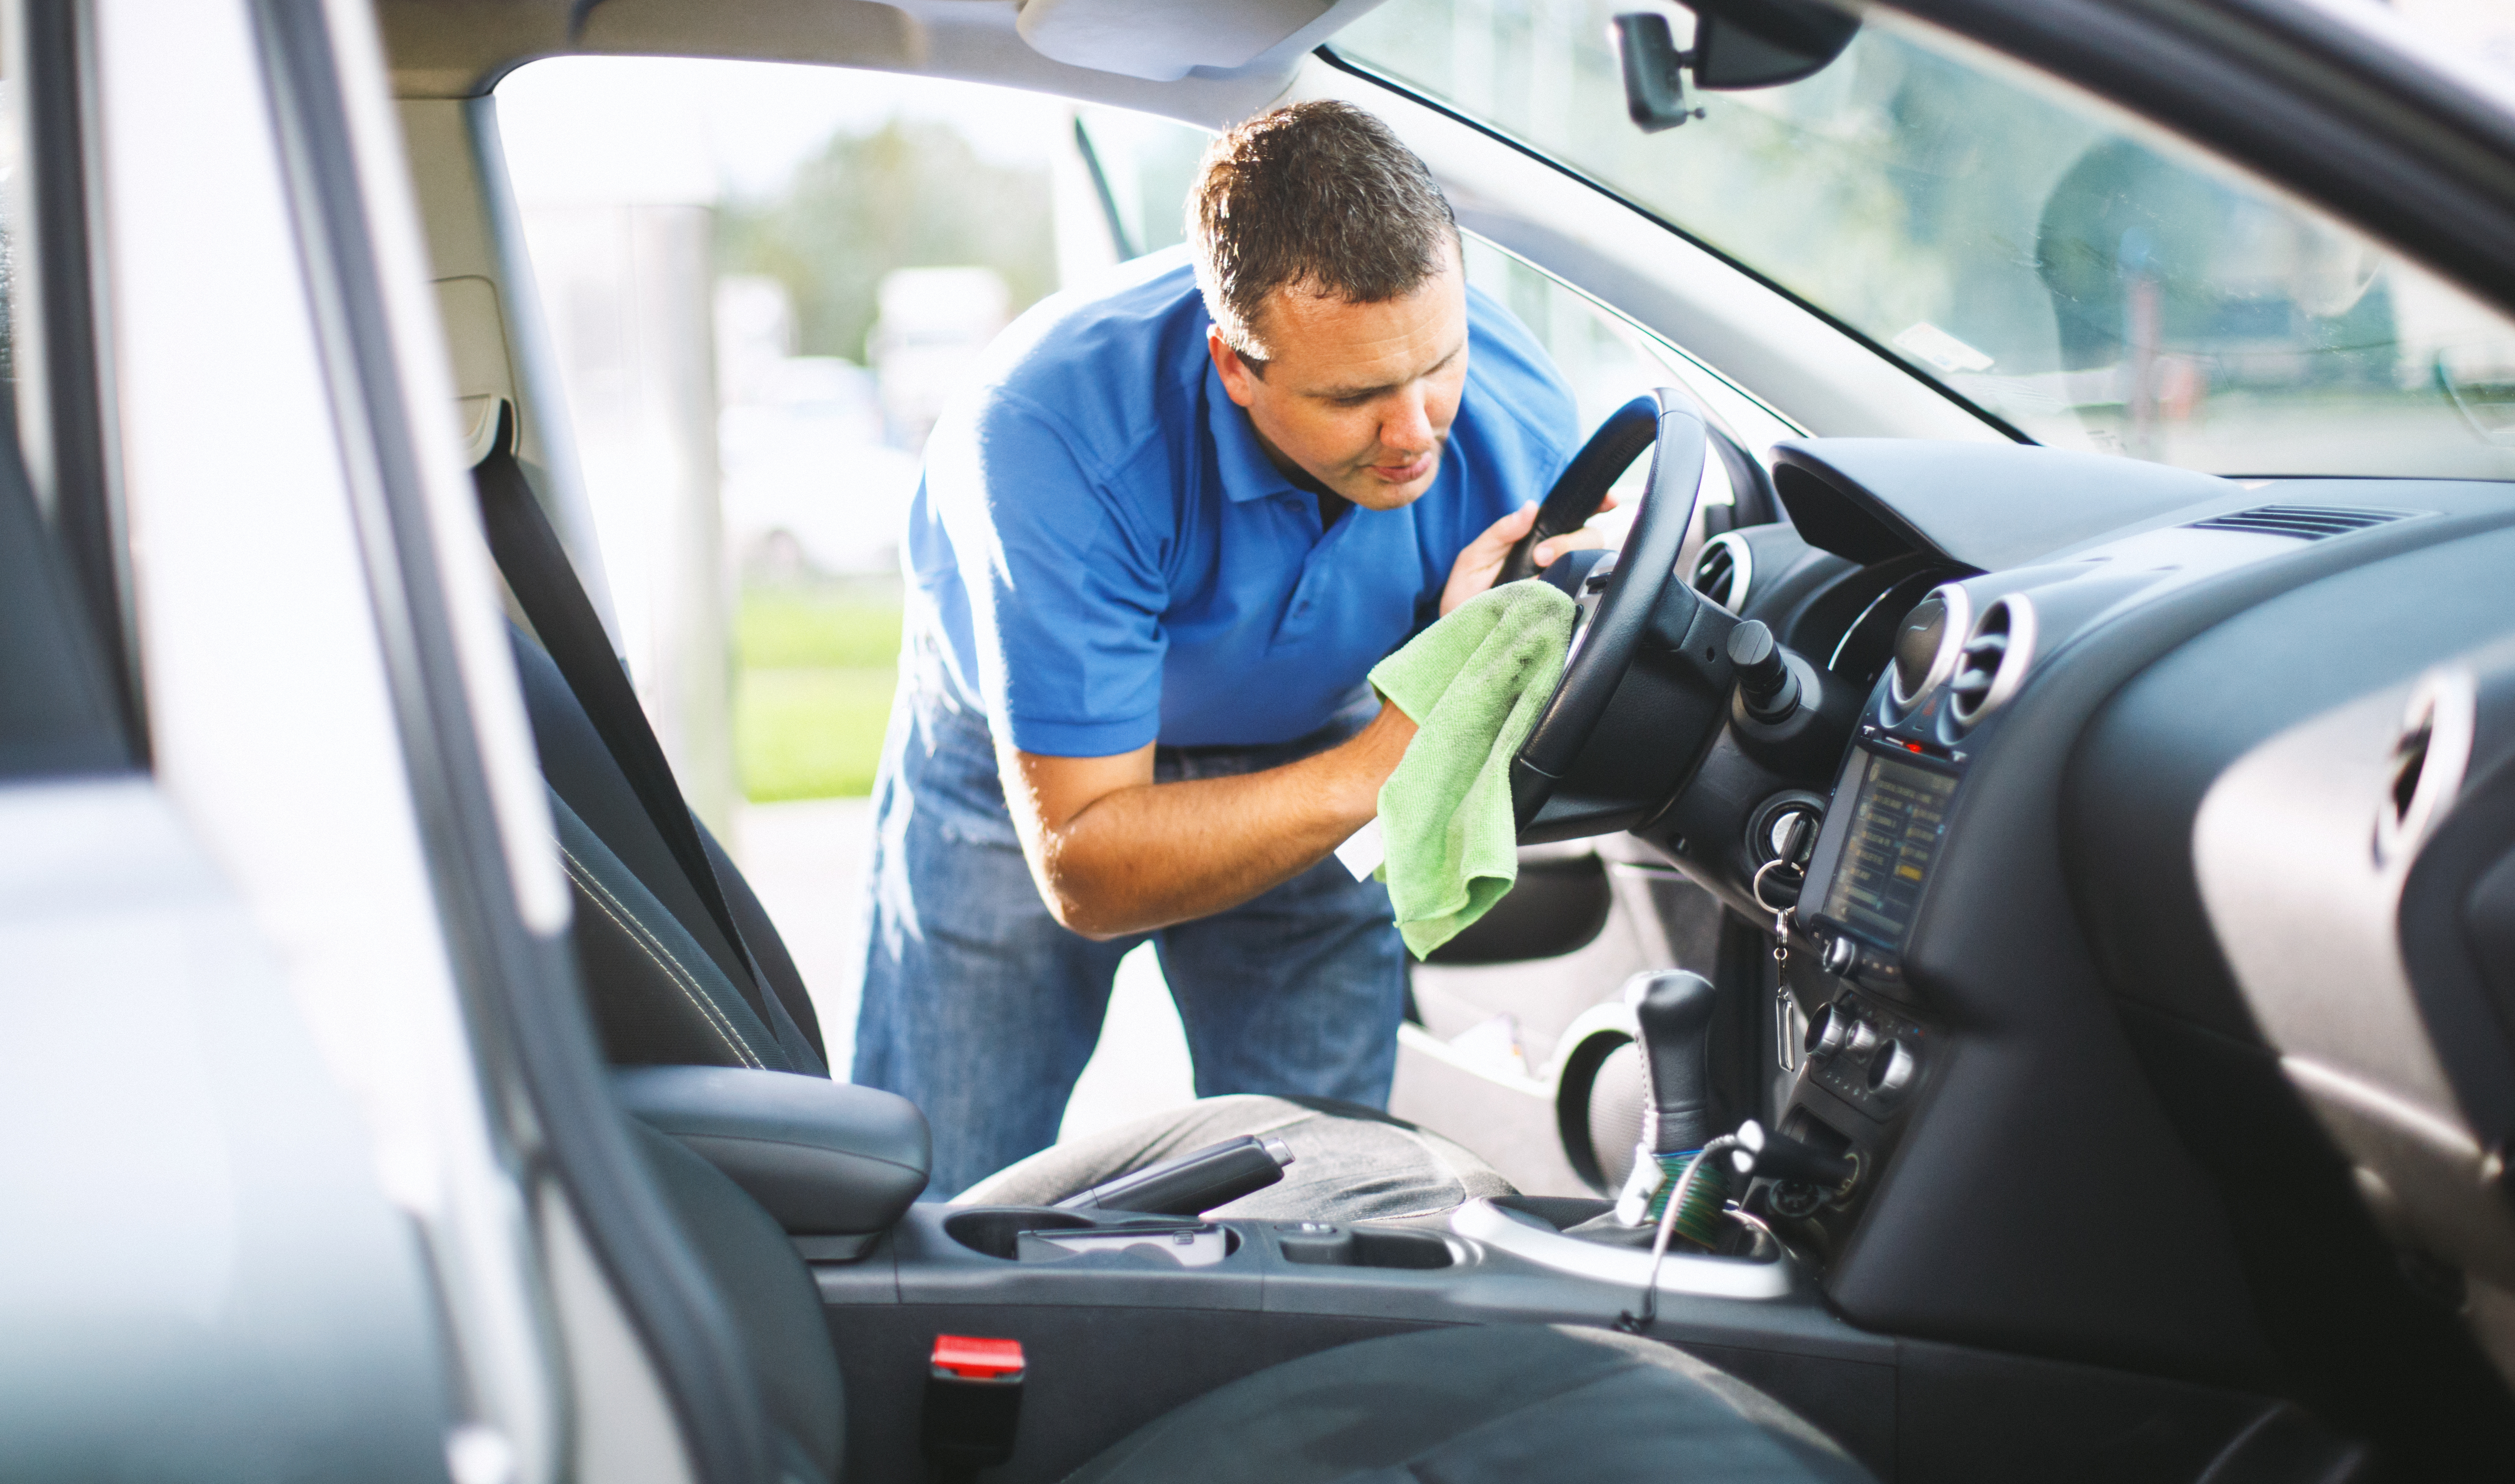 Protect Your Health With a Clean Car - NerdWallet